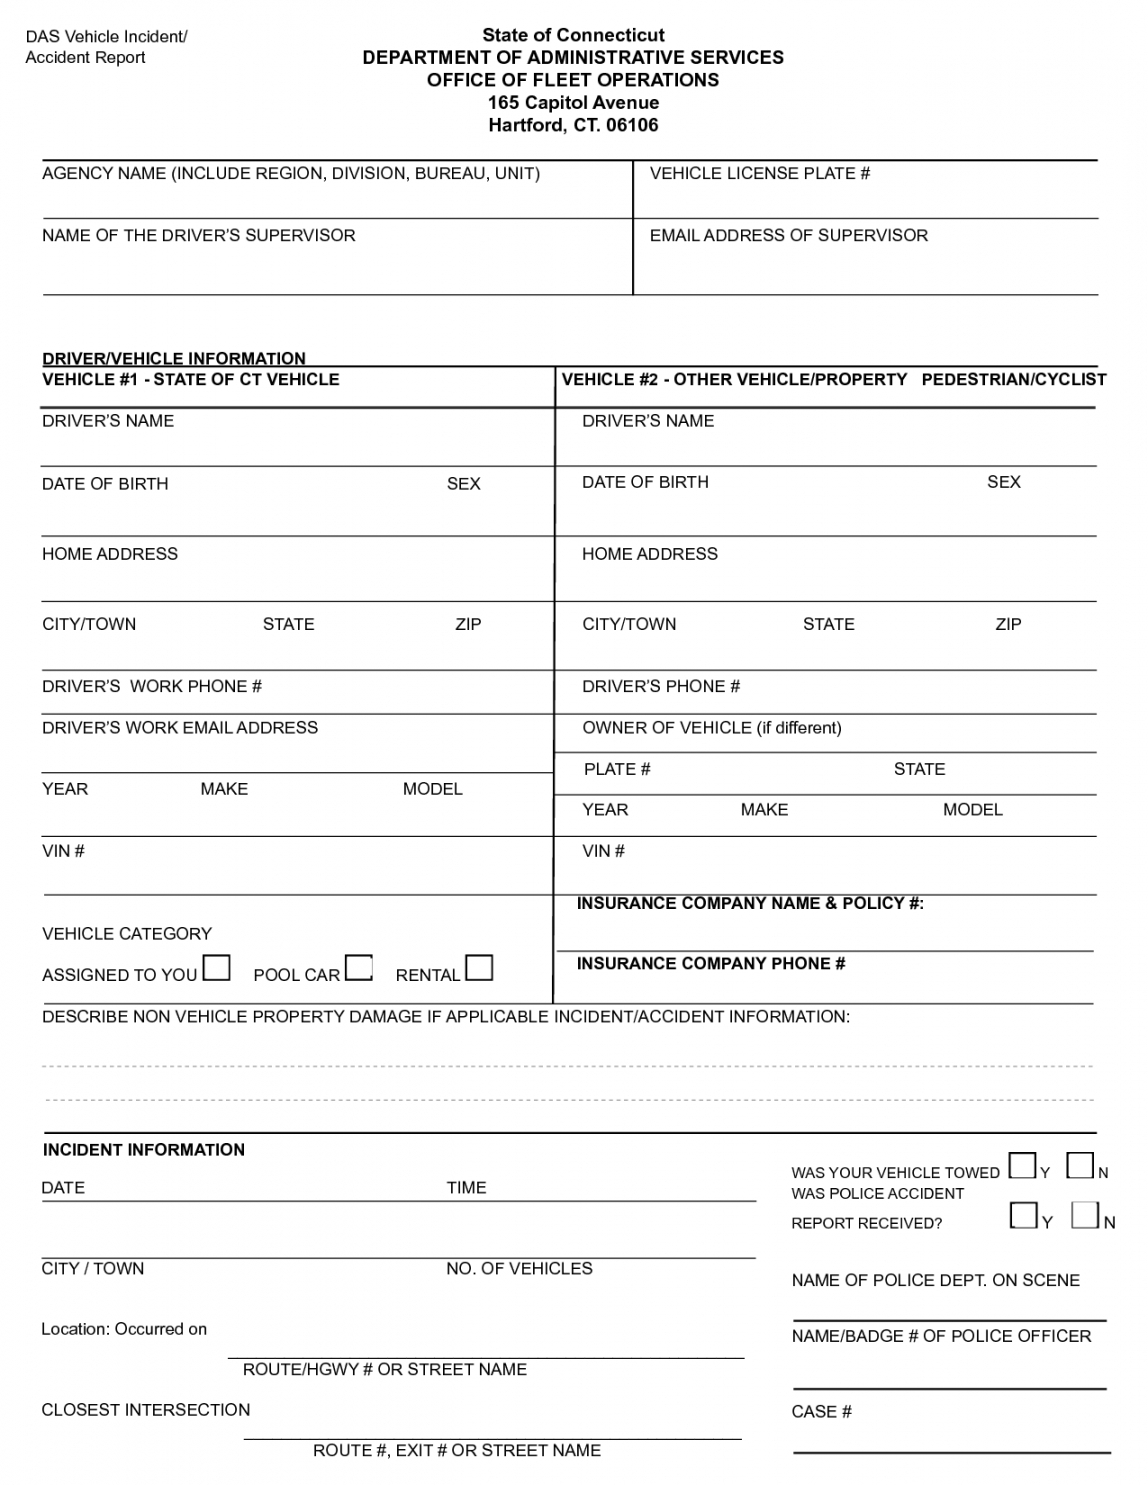 Vehicle Incident Report Template Throughout Incident Report Template Uk